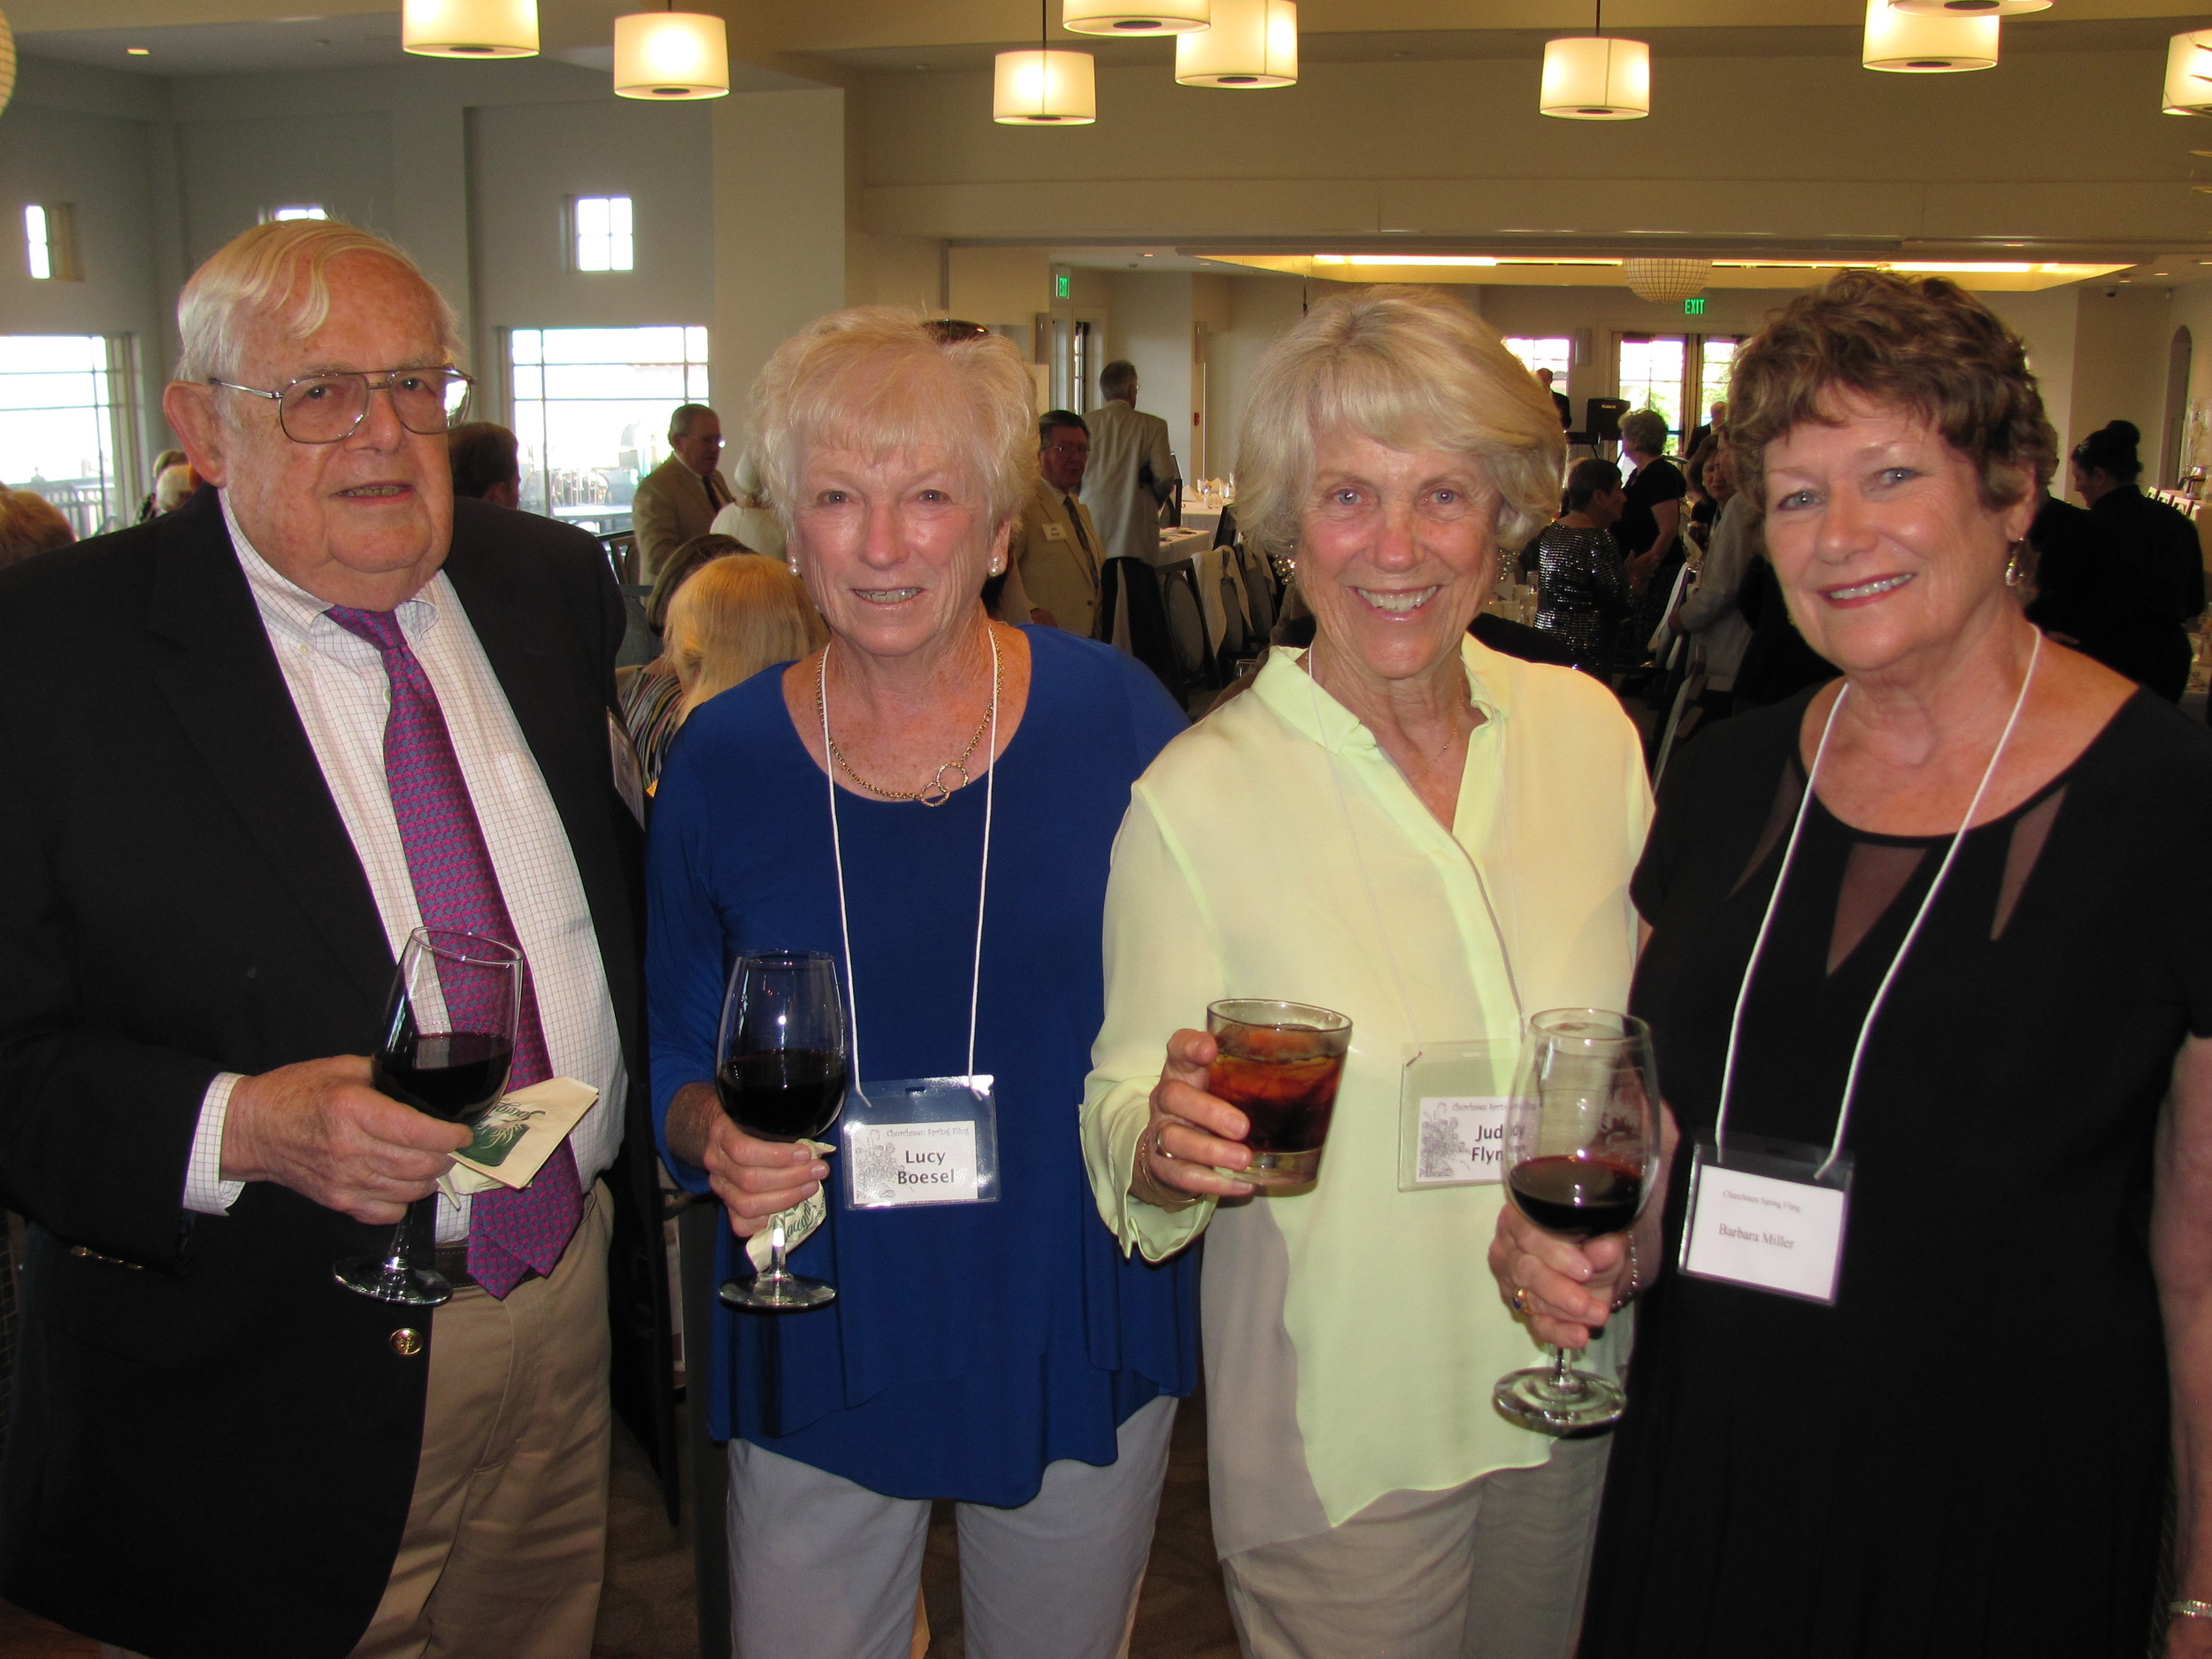 Bud and Lucy Boesel, Judy Flynn and Barbara Miller